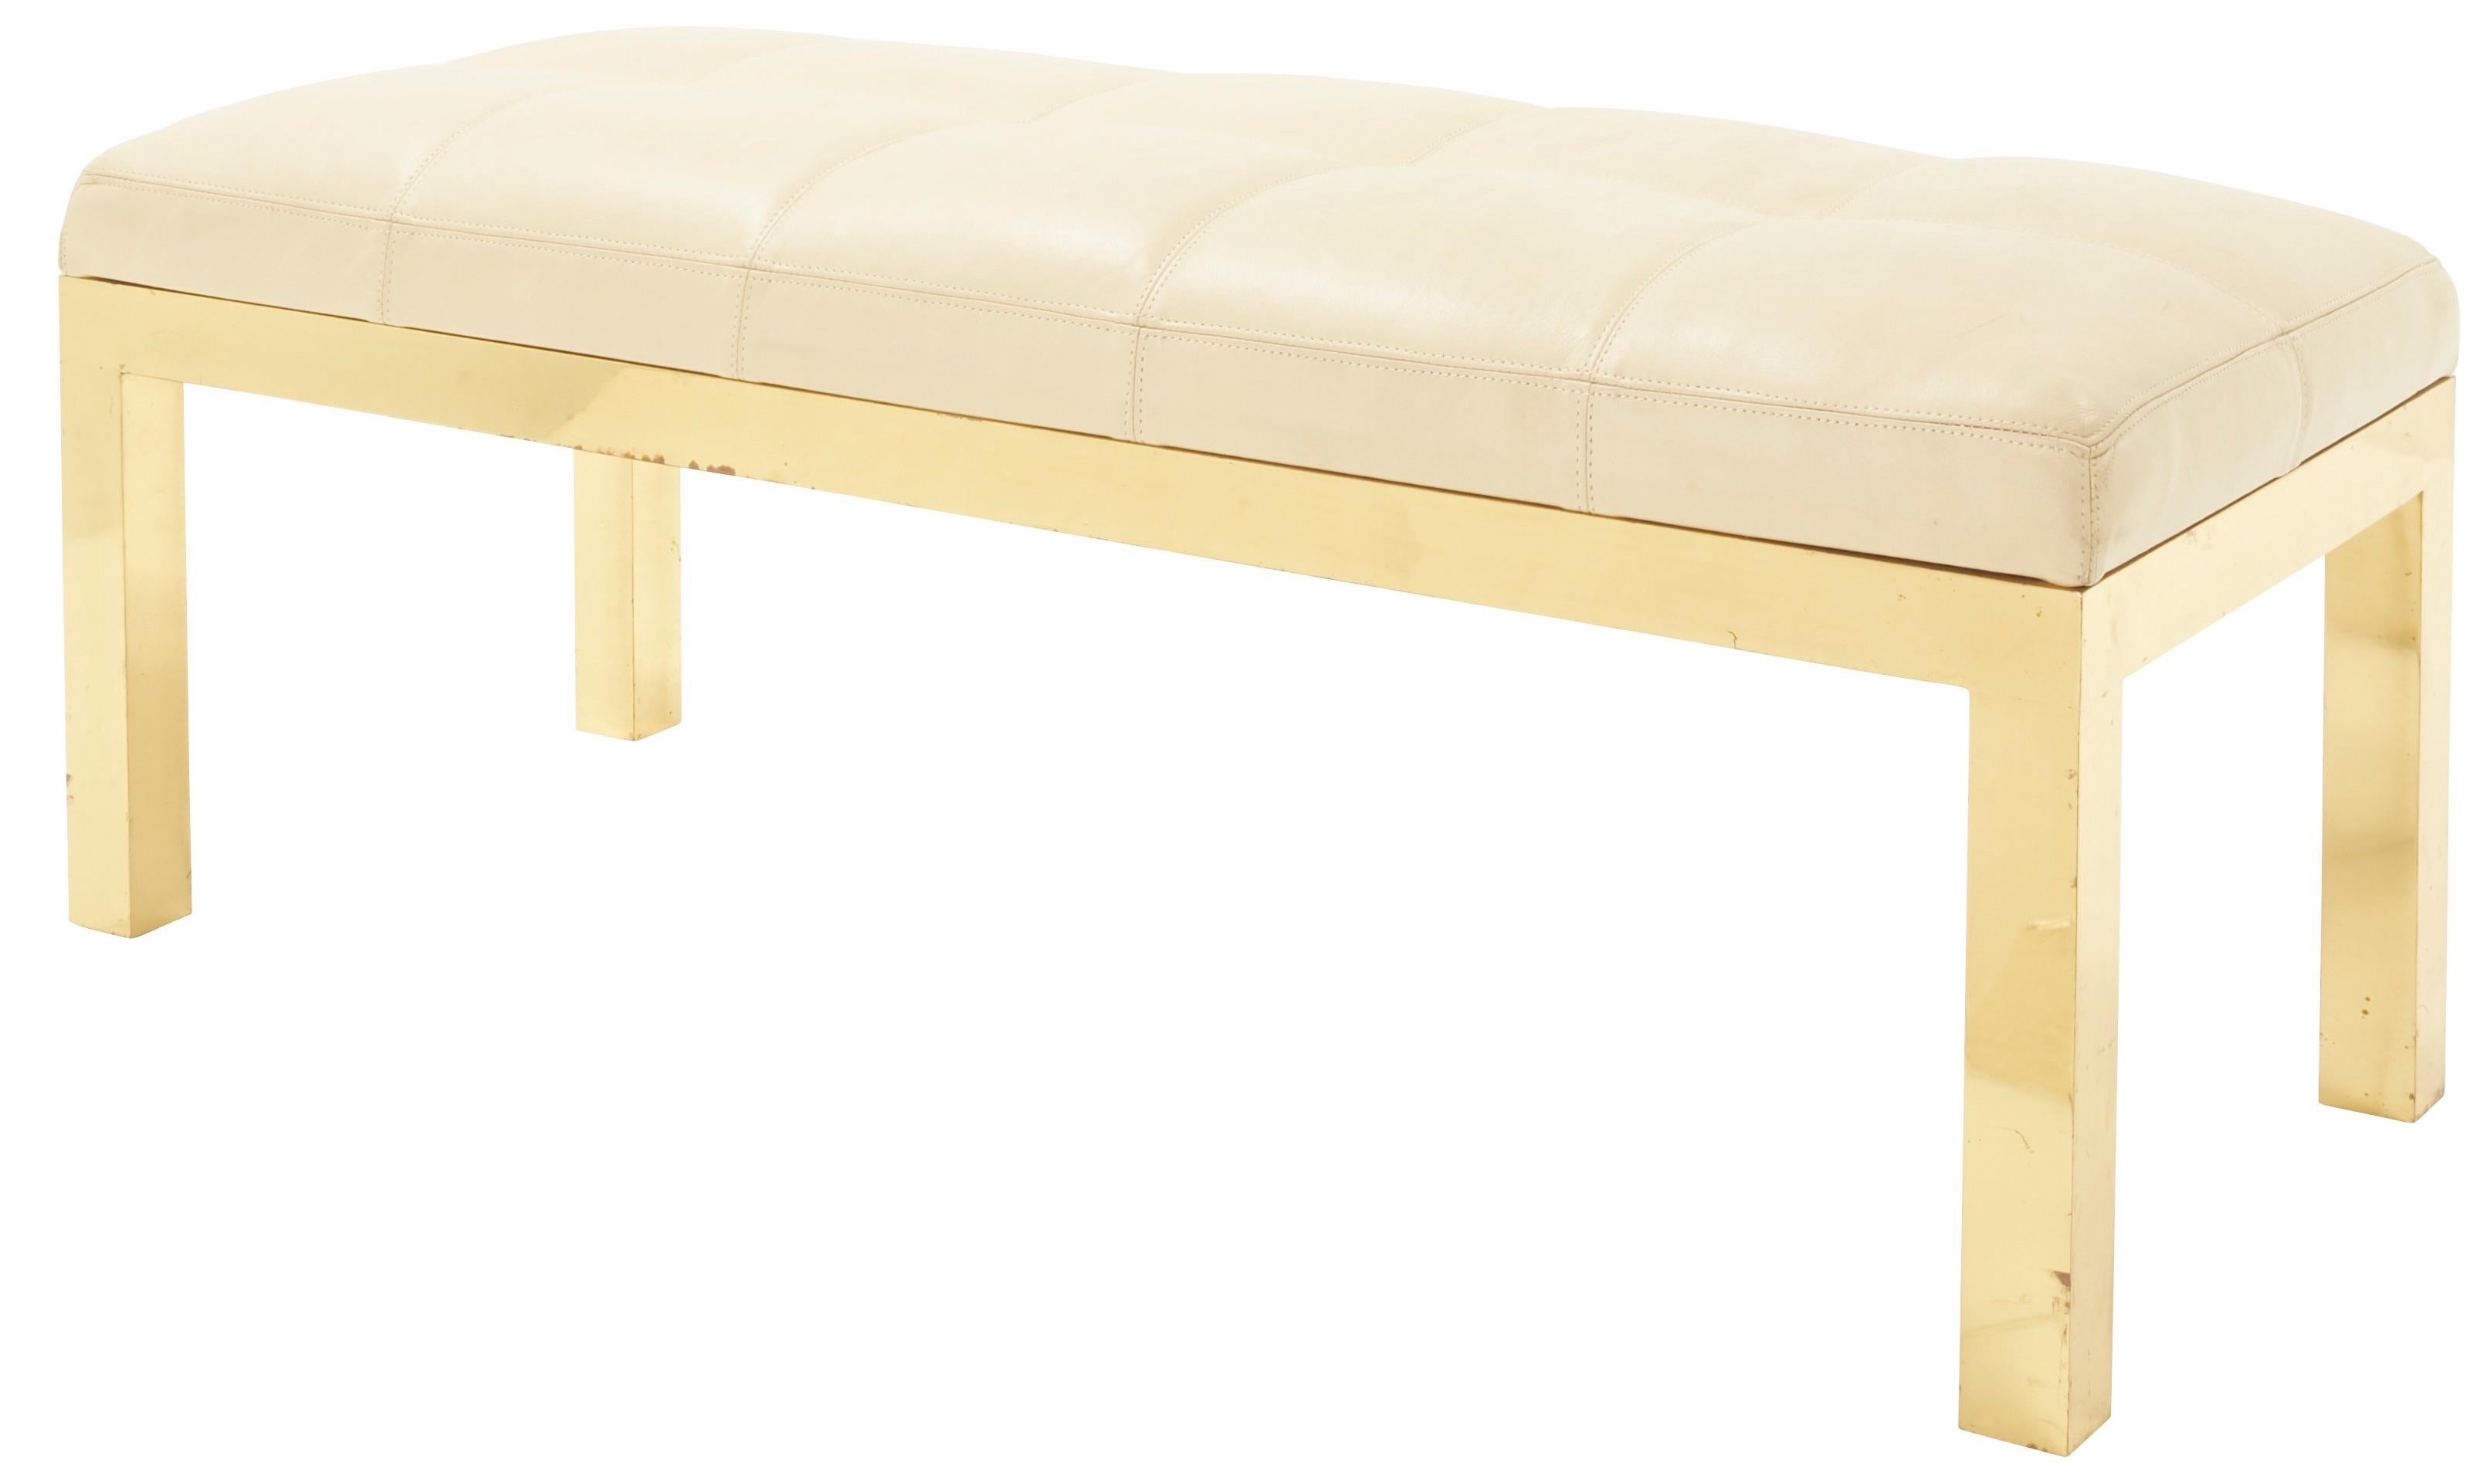 European Midcentury Brass Bench with Saddle Stitched Leather Cushion For Sale